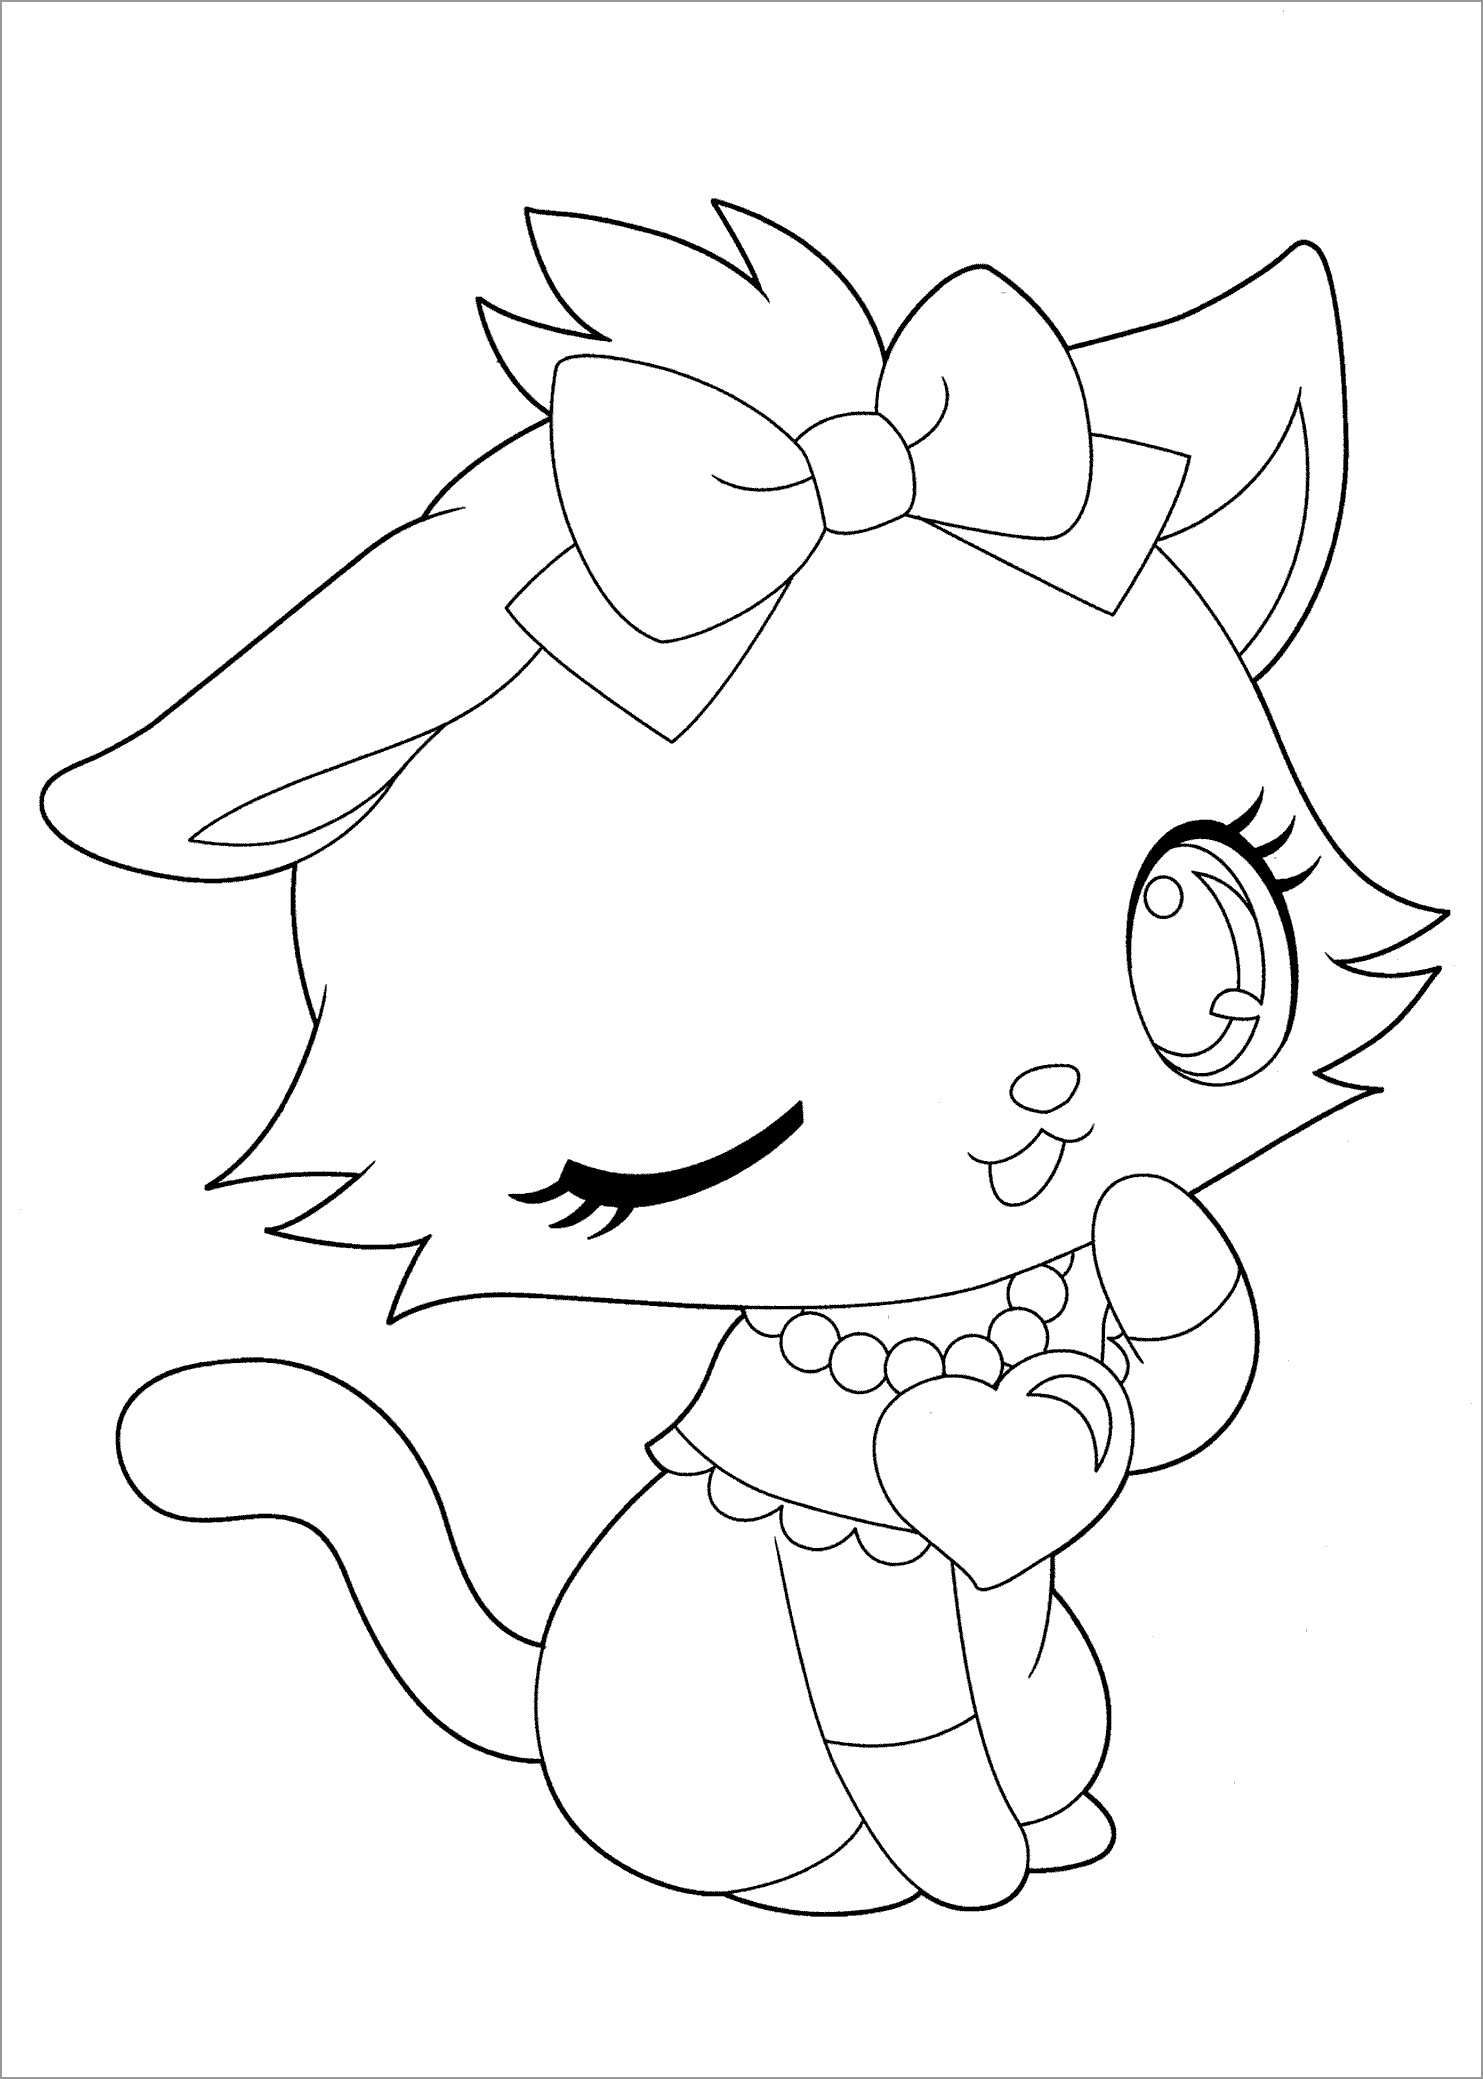 Anime Cat Coloring Page   ColoringBay